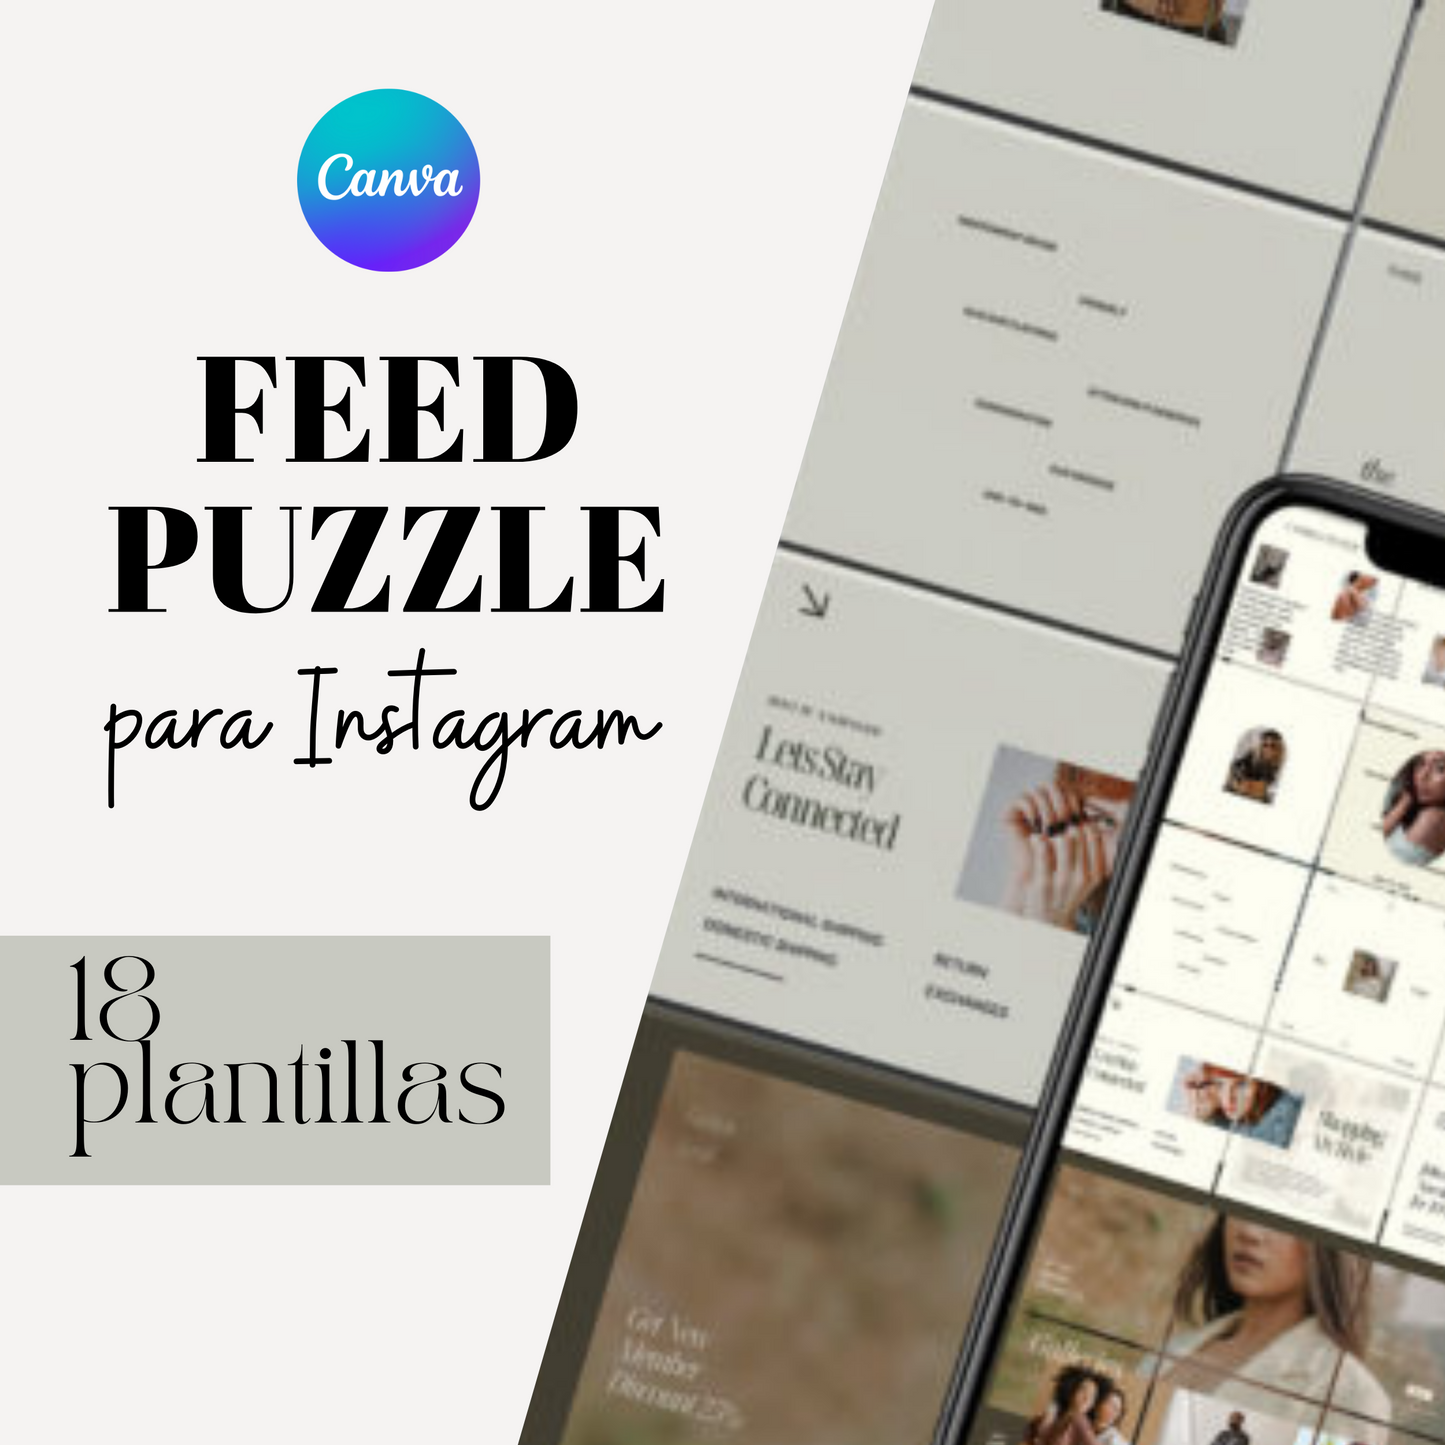 Puzzle feed Instagram Canva